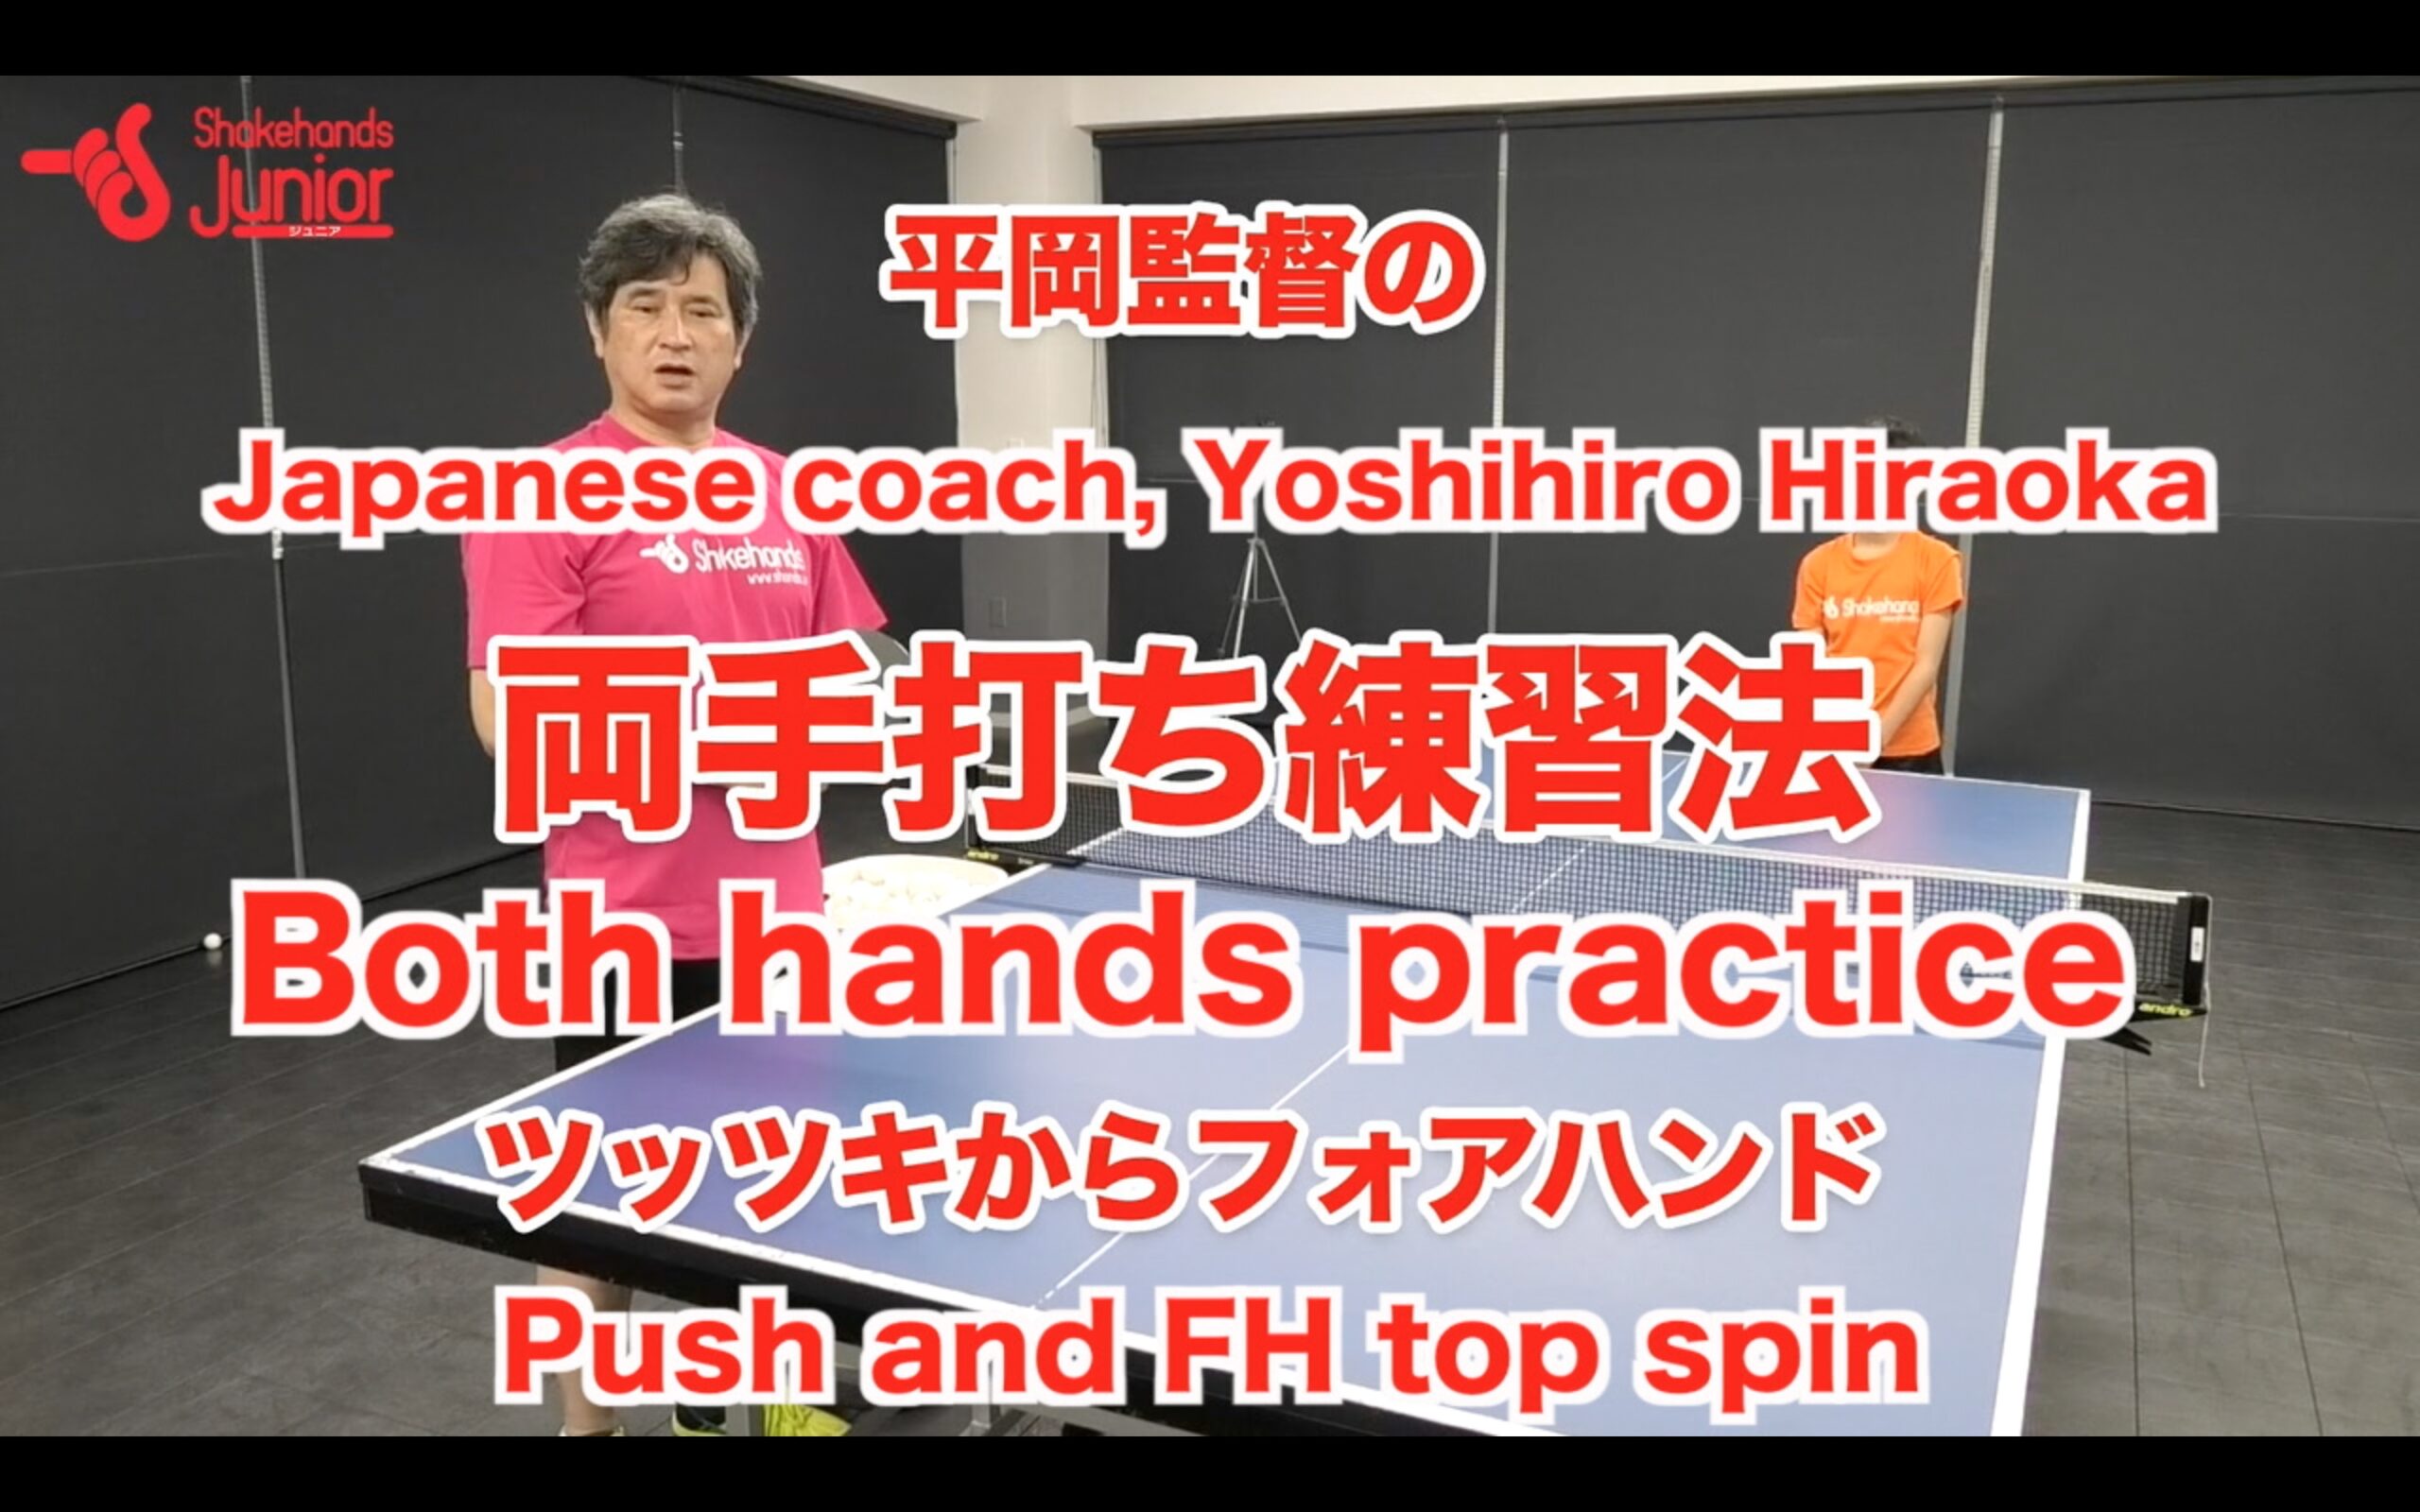 Both hands practice push and top spin